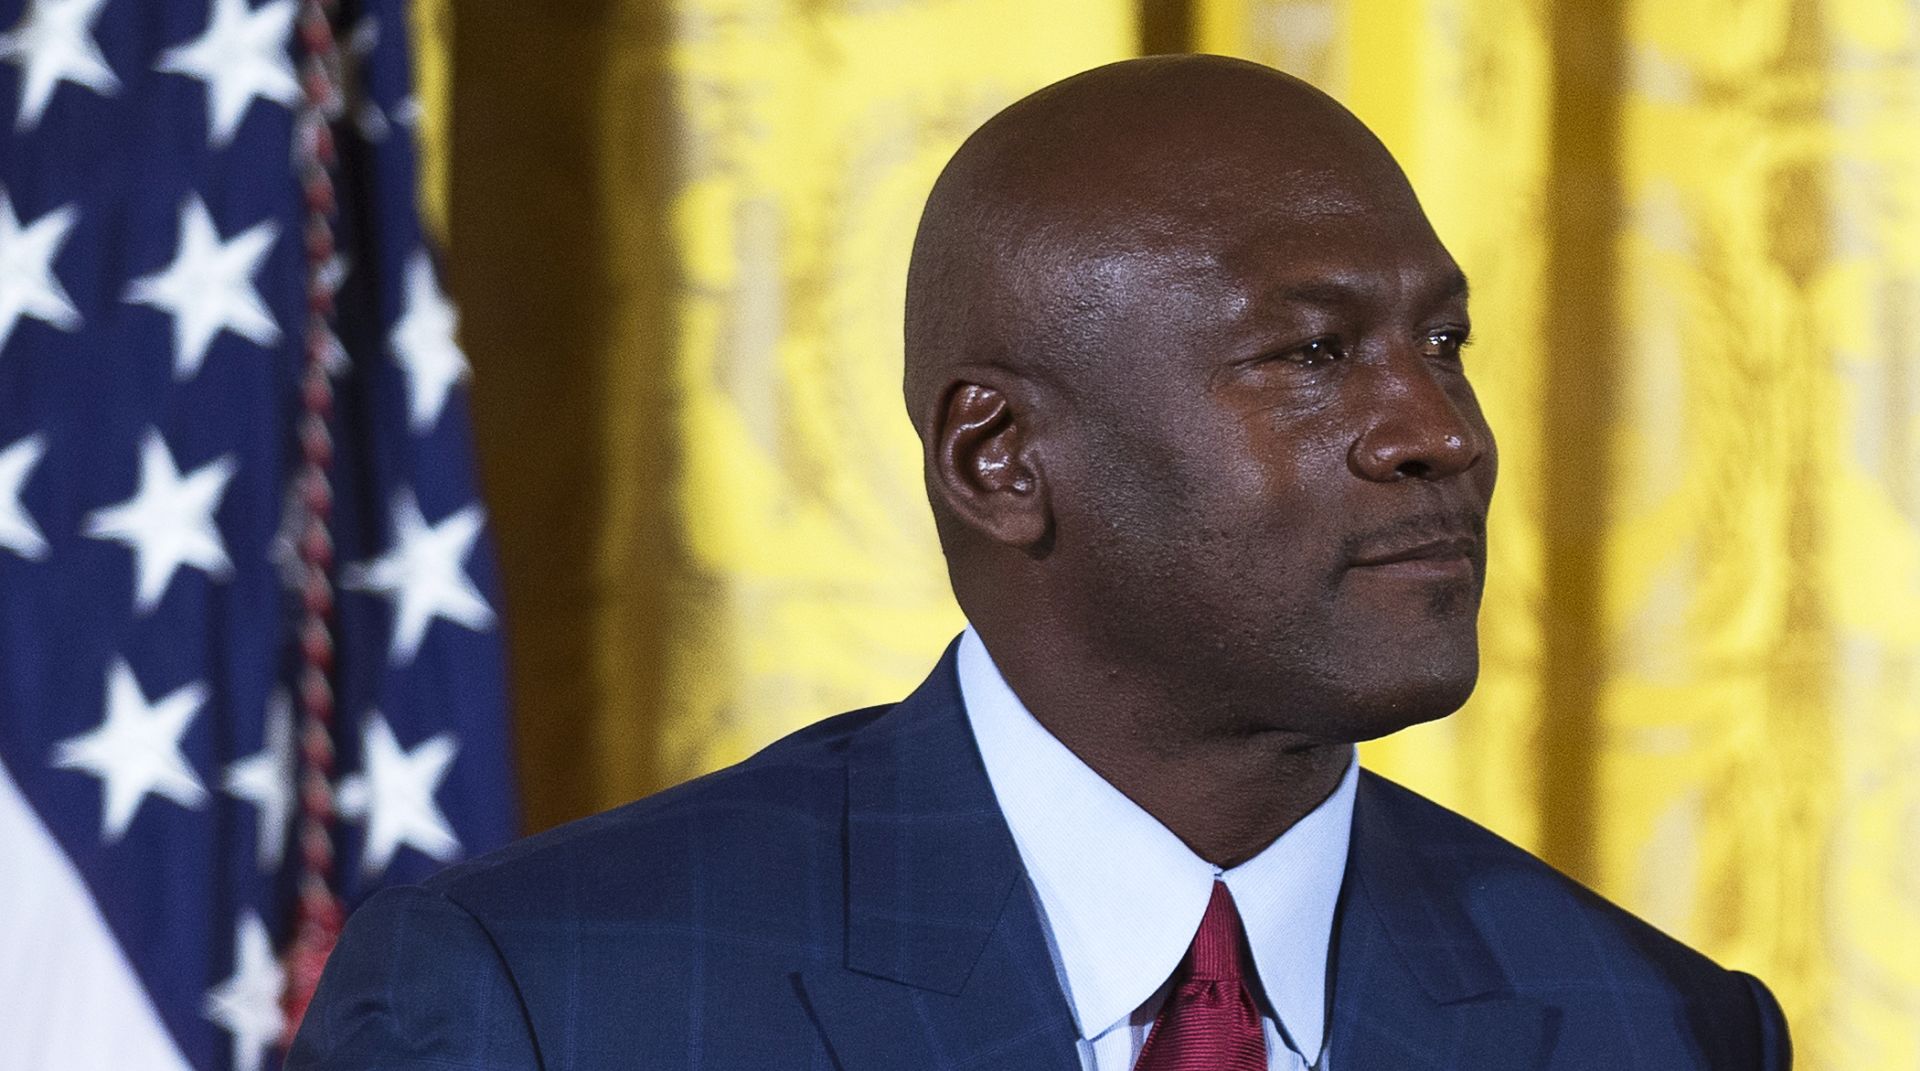 epa08457583 (FILE) - Former NBA star Michael Jordan receives the Presidential Medal of Freedom during a ceremony in the White House in Washington, DC, USA, 22 November 2016 (re-issued on 01 June 2020). Michael Jordan condemned 'ingrained racism' in the United States in a statement on the death of George Floyd released on 31 May 2020.  EPA/SHAWN THEW *** Local Caption *** 53130492